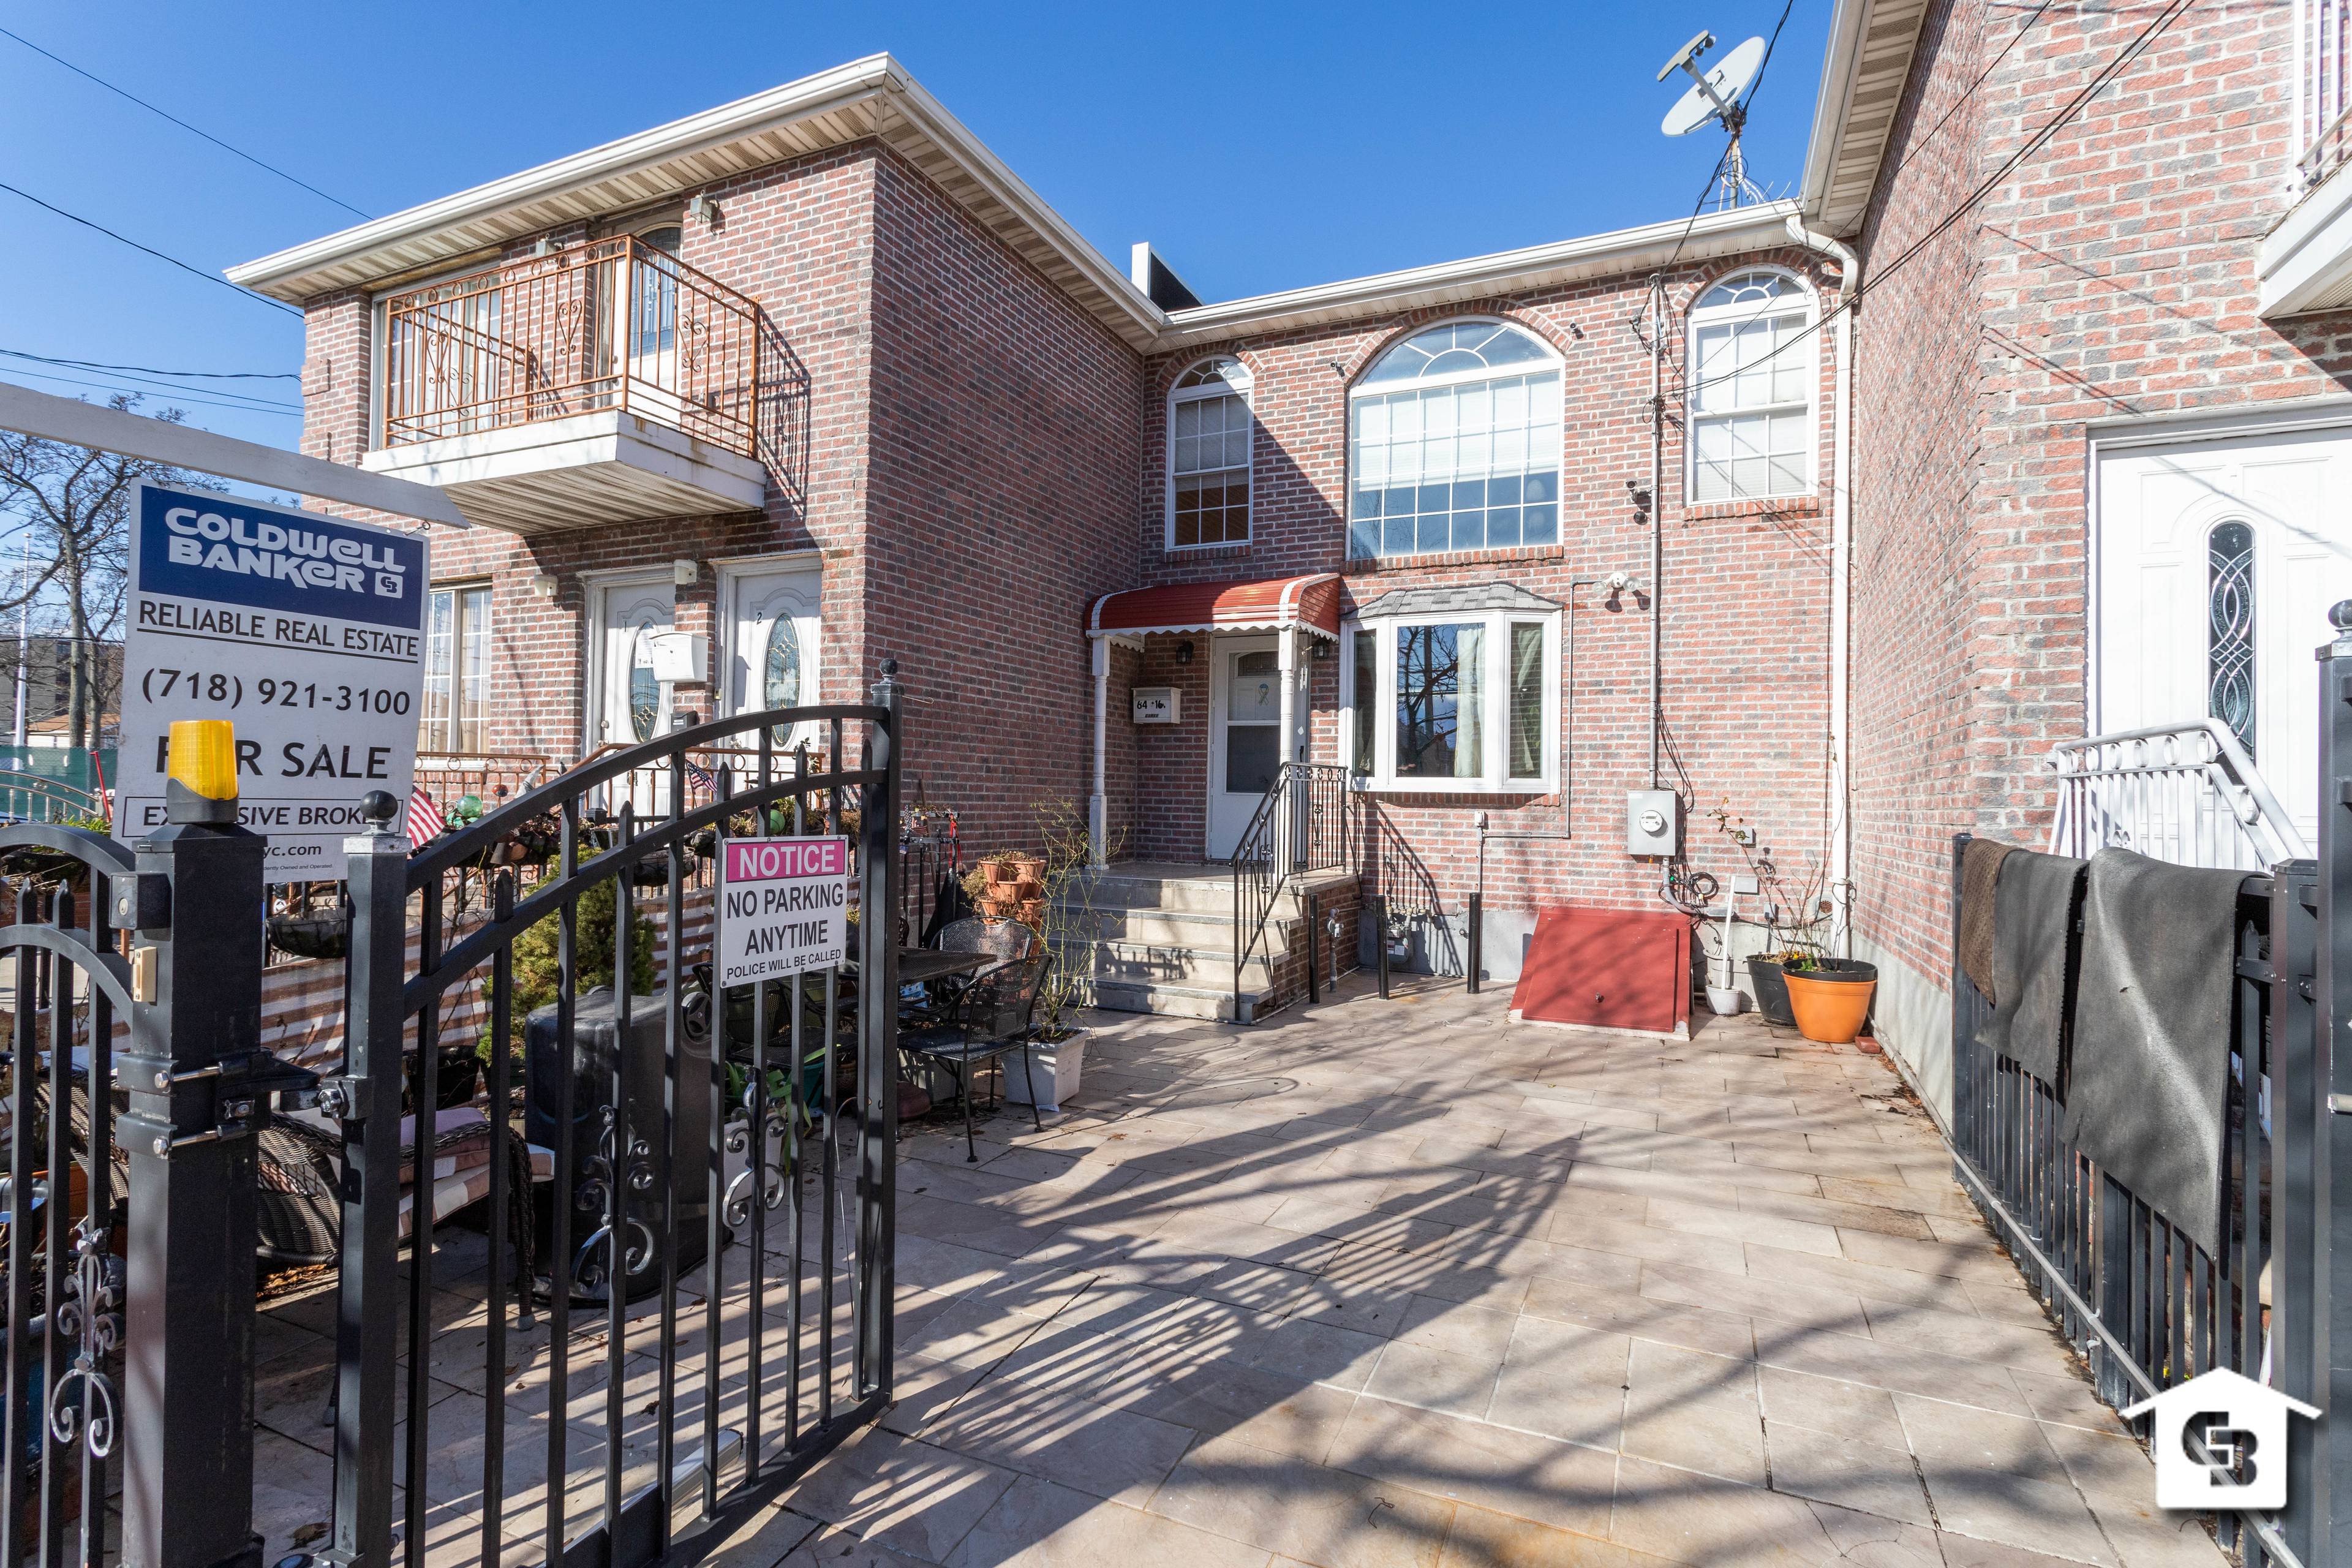 Located in Arverne, New York, this single family brick home is nestled in a quiet residential seaside enclave.